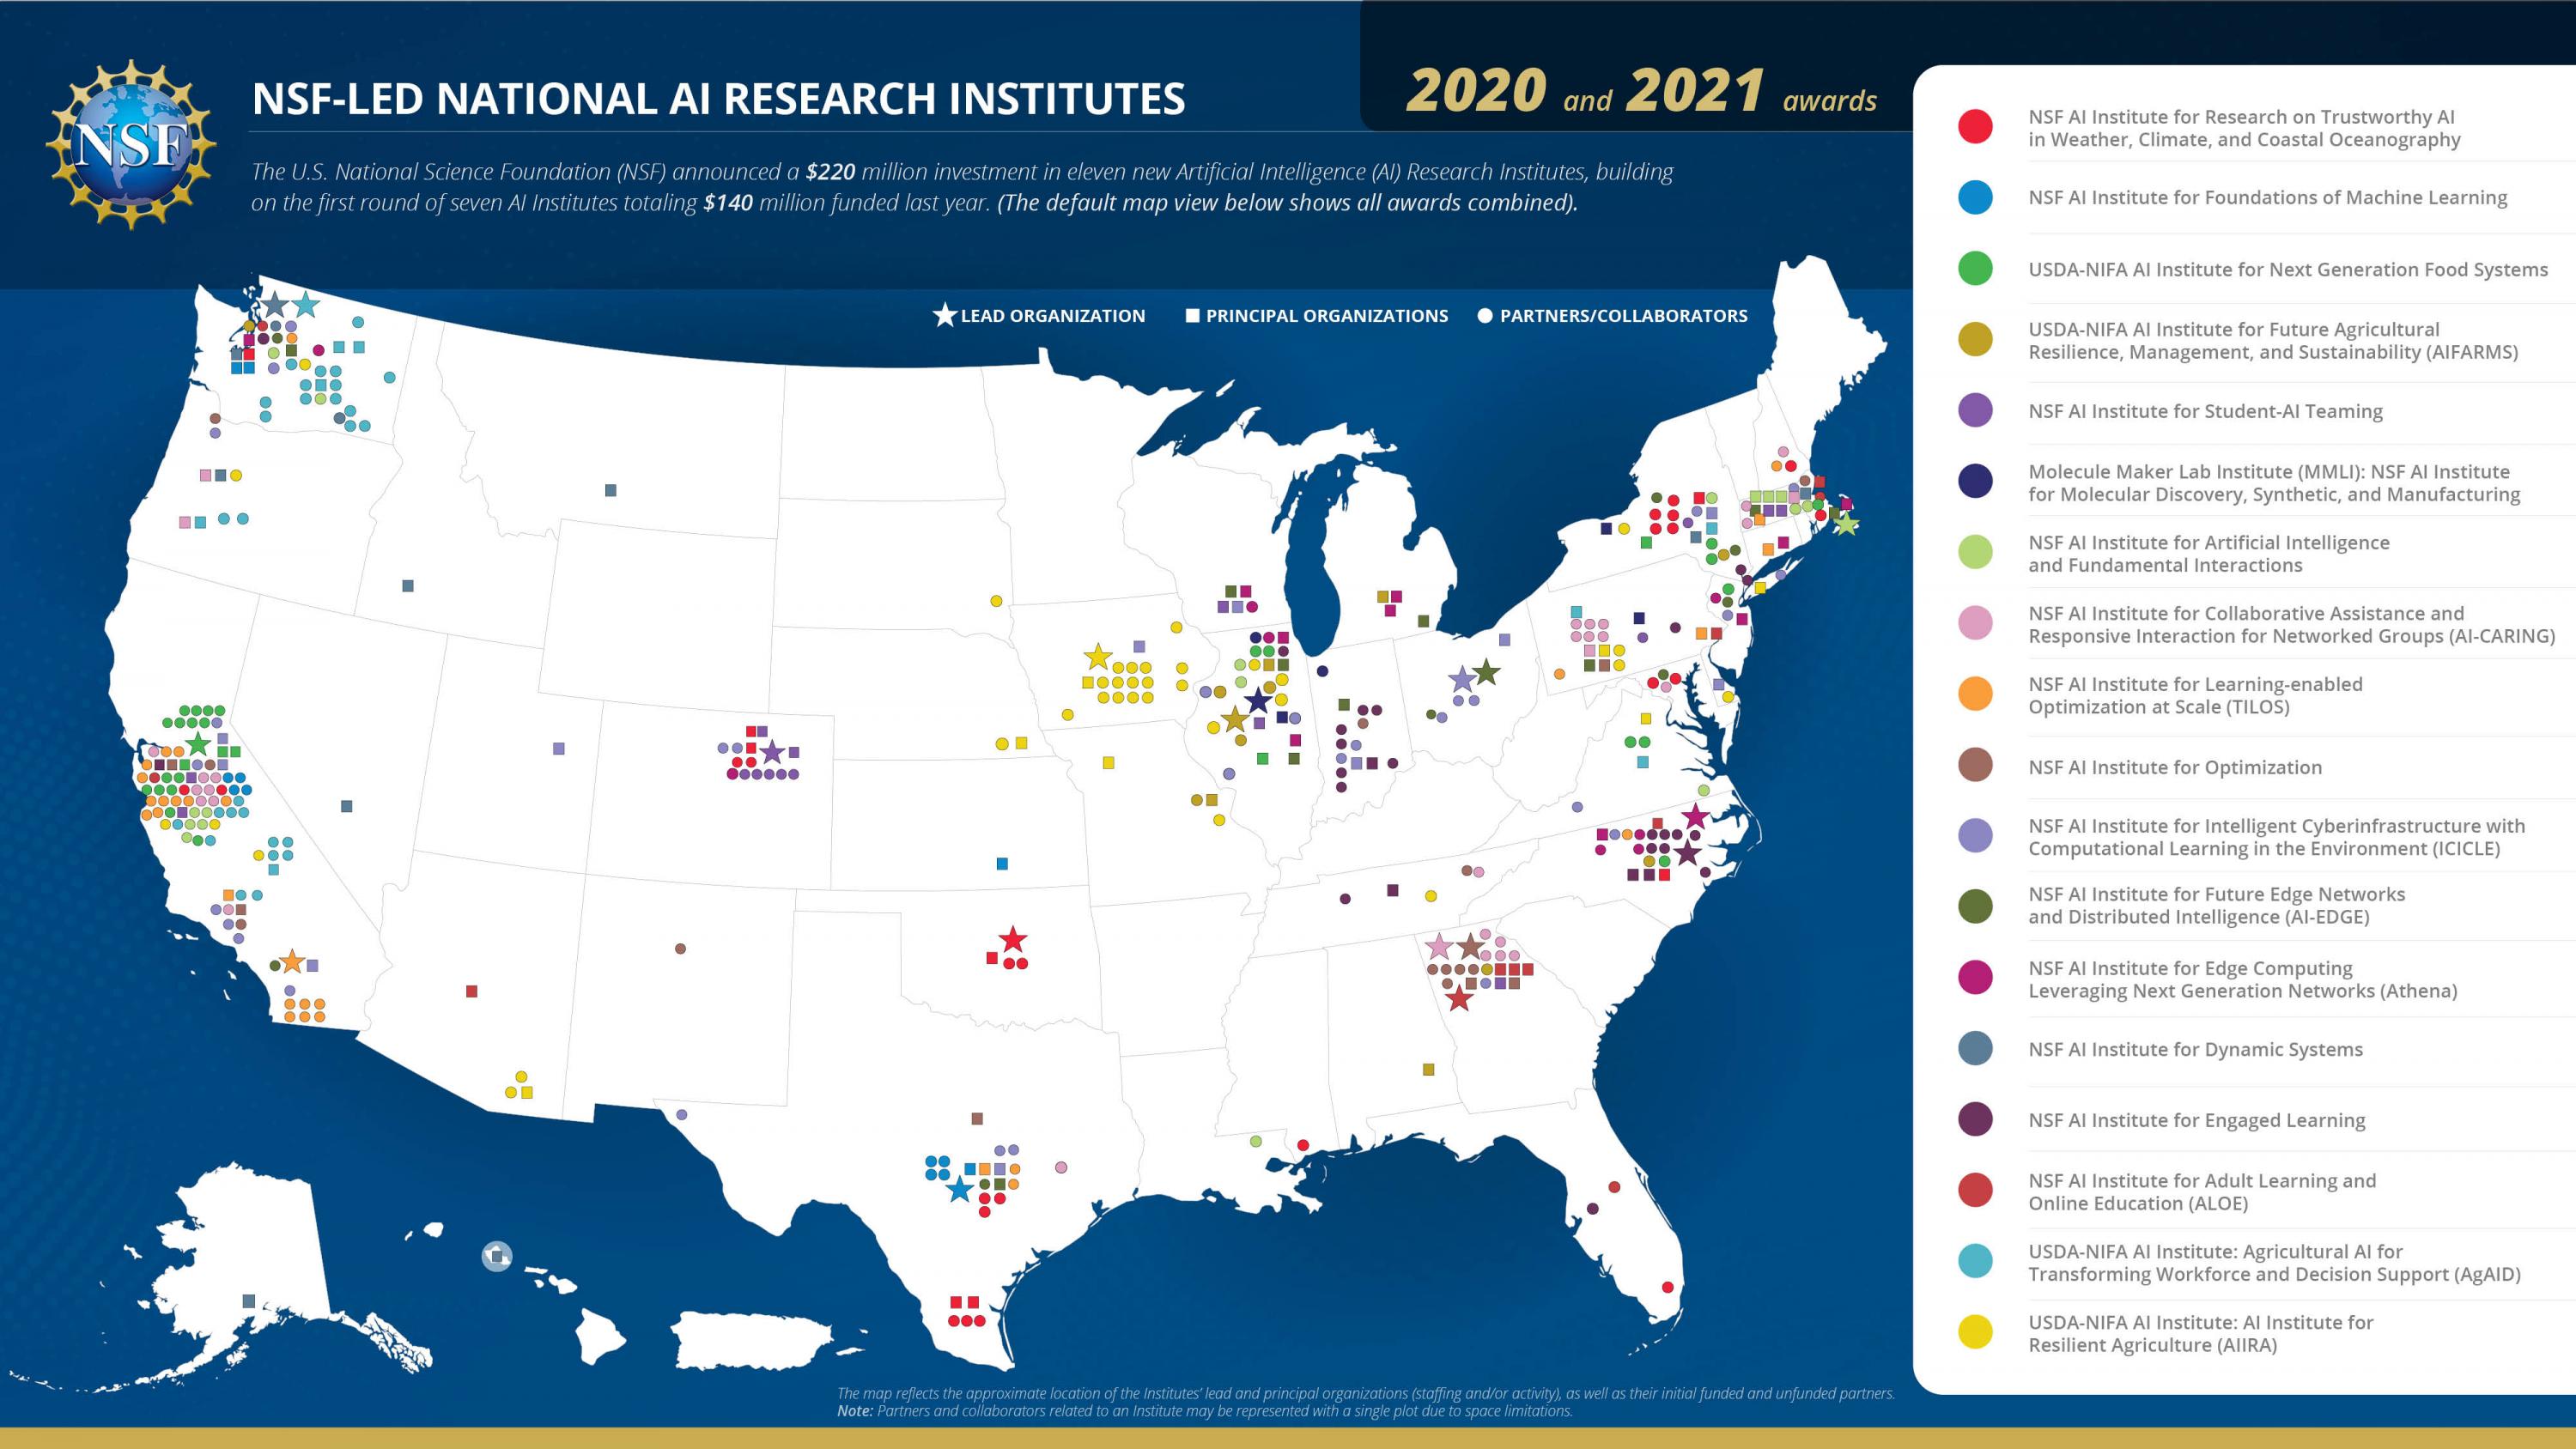 Map of the United States reflecting the location of the Artificial Intelligence National Research Institutes led by the U.S. National Science Foundation, including lead and principal organizations, and funded and unfunded partners and collaborators.  Credit: U.S. National Science Foundation.